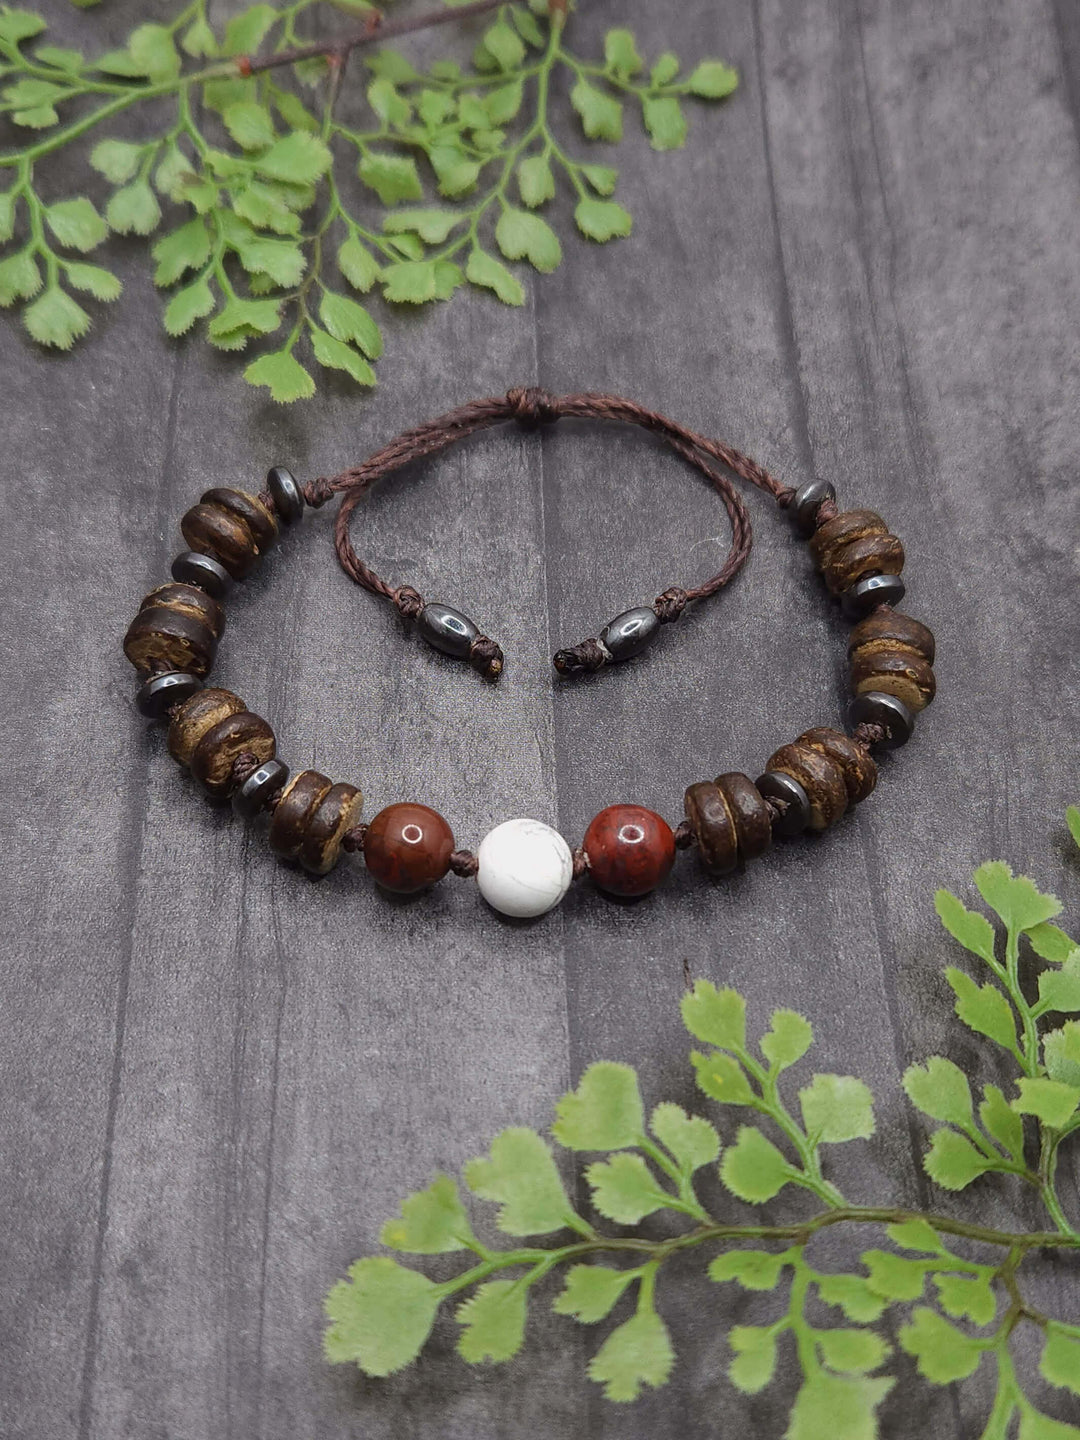 This photo of the Red Panda Bracelet shows the unique mix of wood and gemstone beads that makeup the bracelet.  